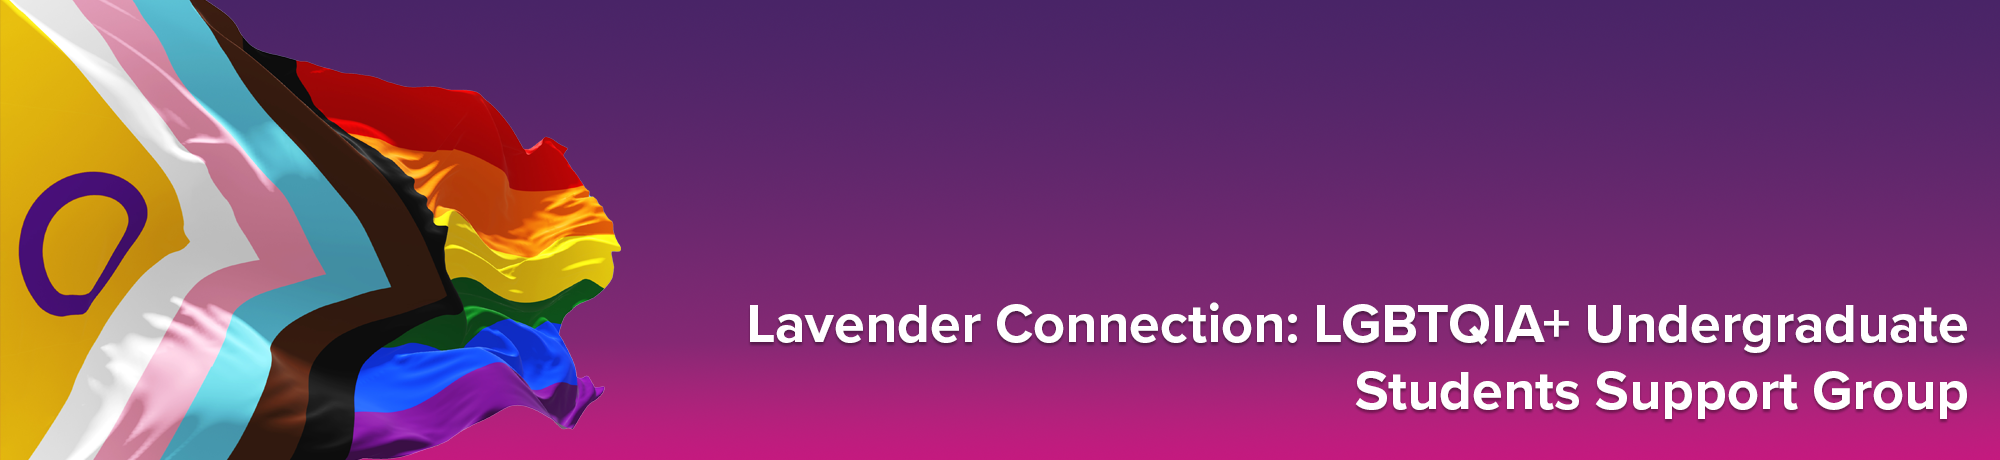 Lavender Connection: LGBTQIA+ Undergraduate Students Support Group Banner